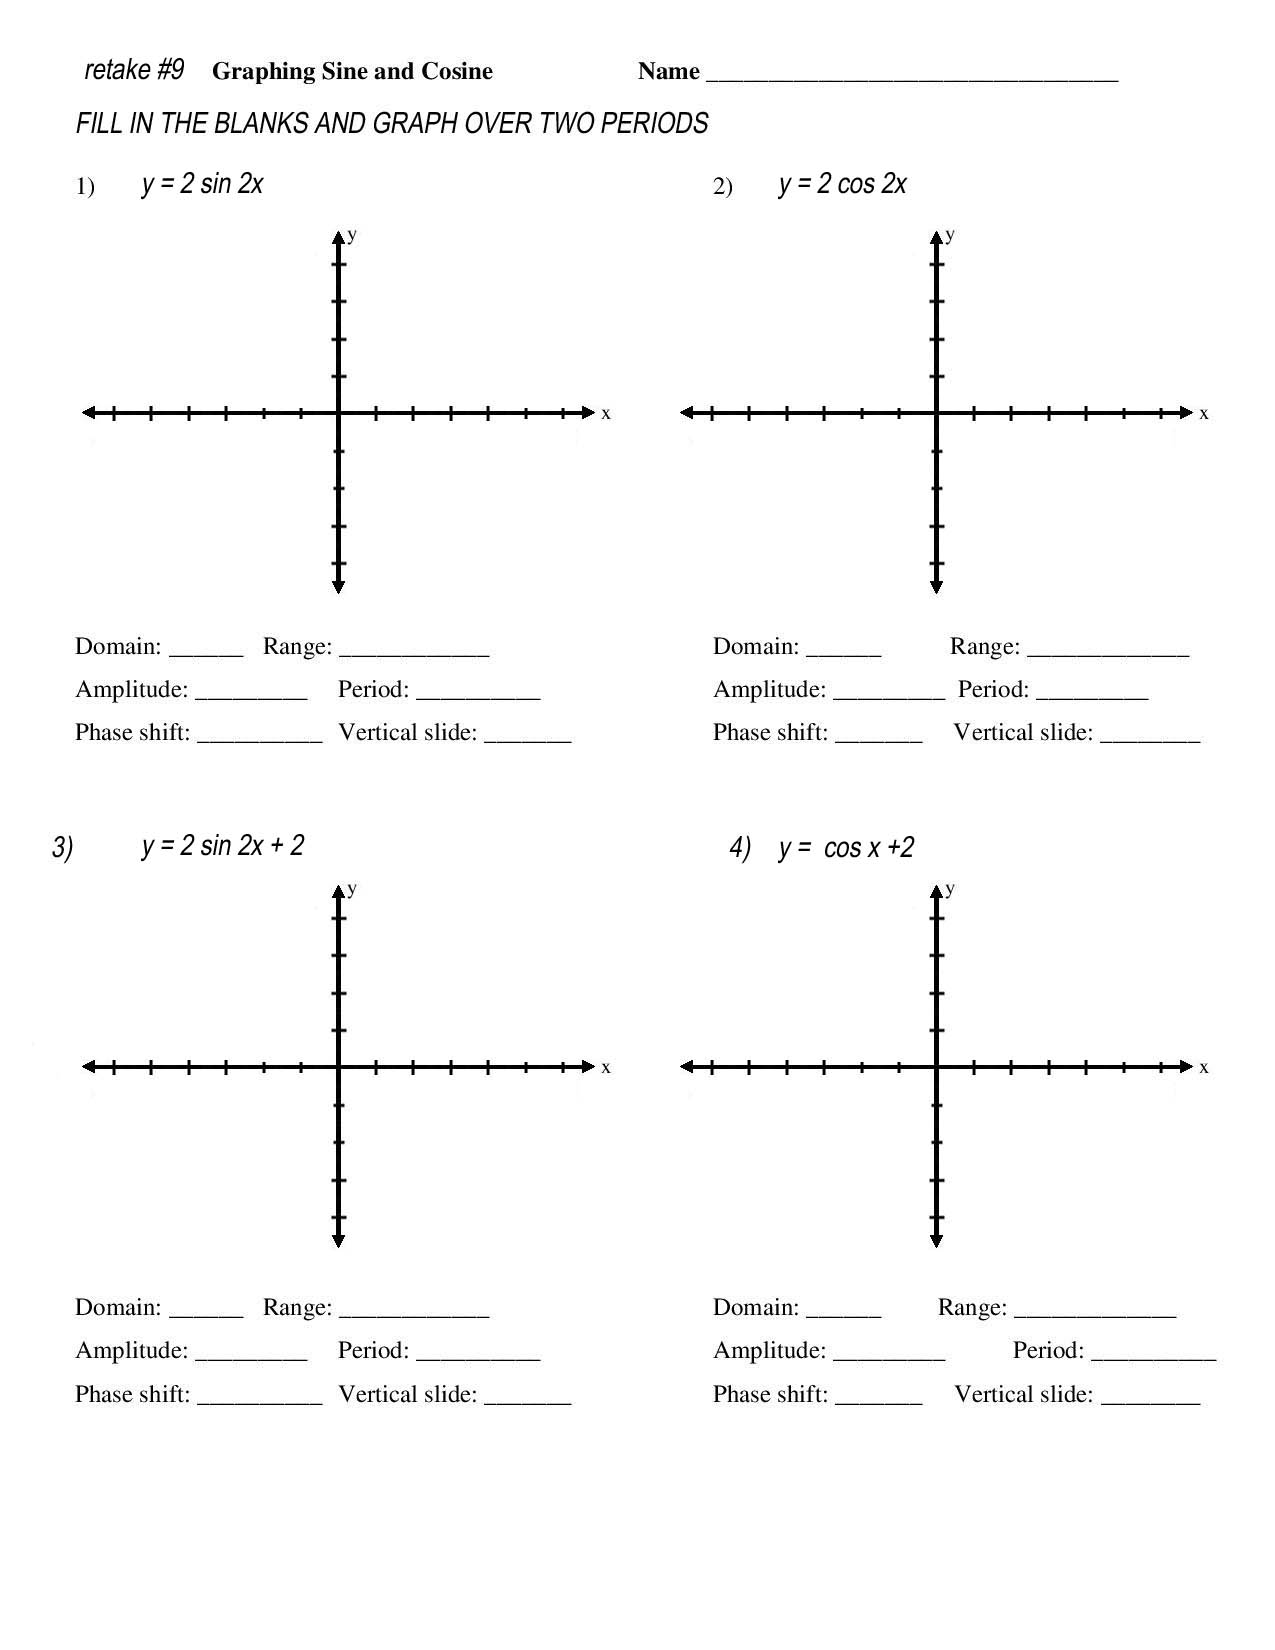 precal_25wk25 - Coach Cortinas Pertaining To Graphing Trig Functions Practice Worksheet